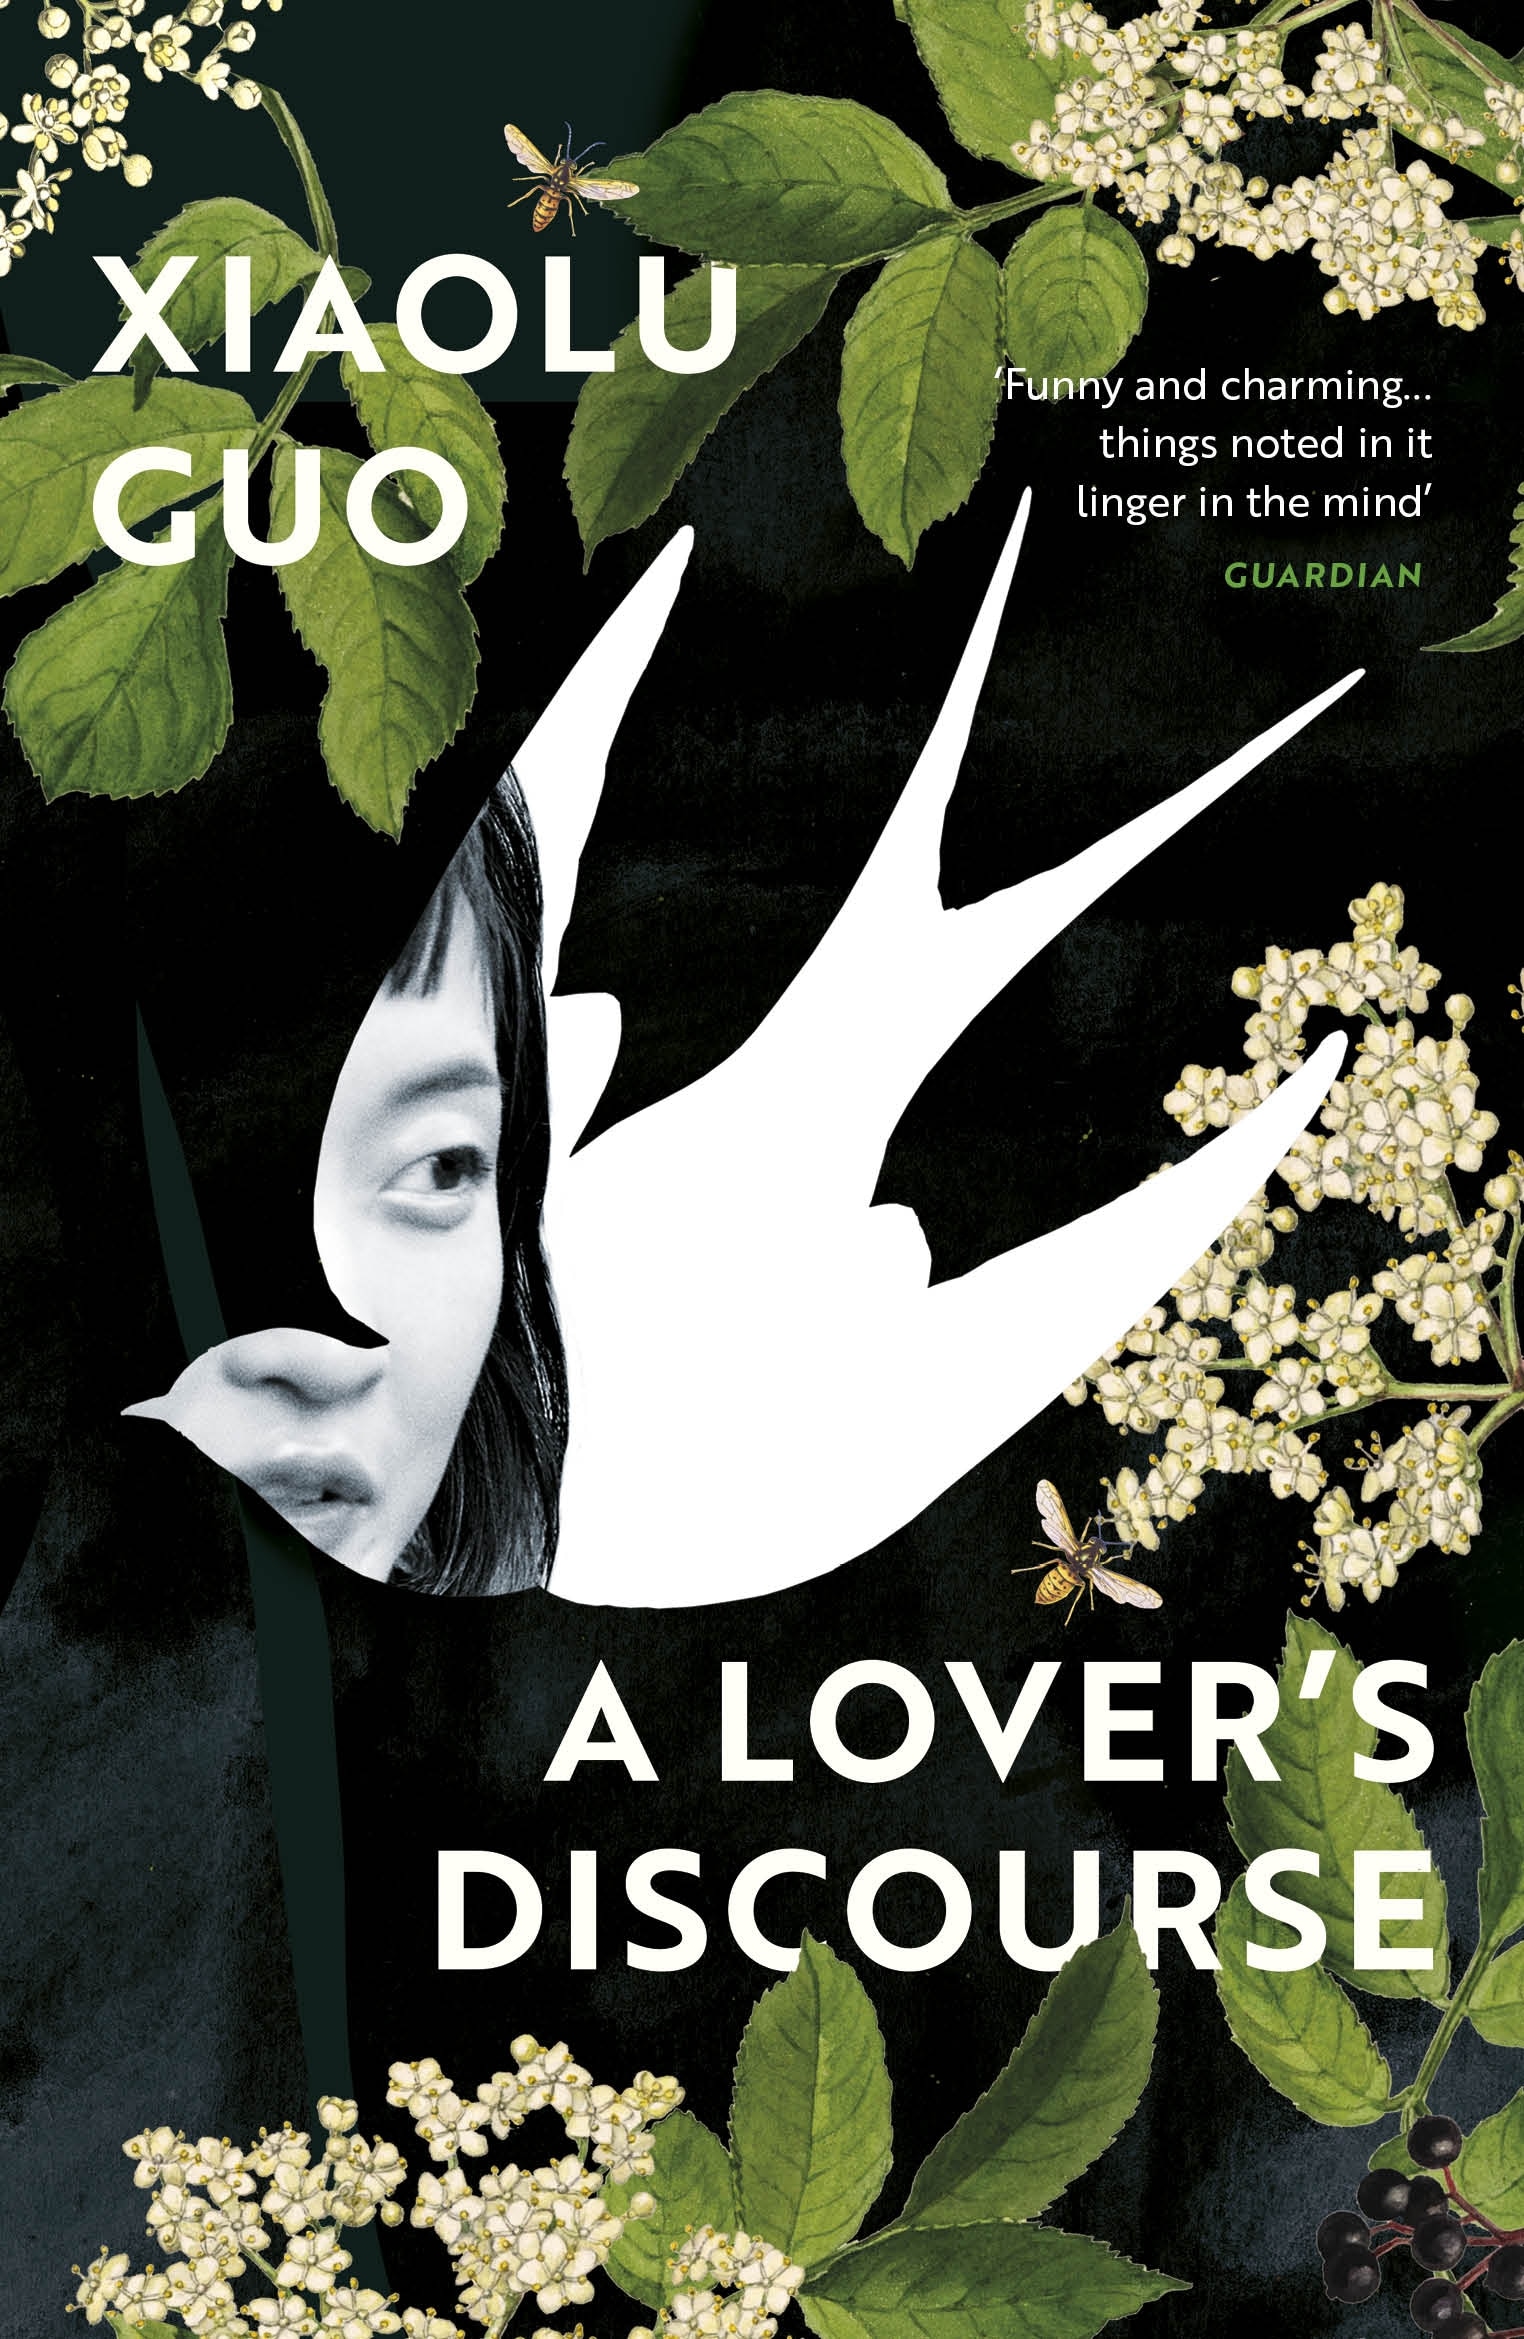 Book “A Lover's Discourse” by Xiaolu Guo — May 6, 2021